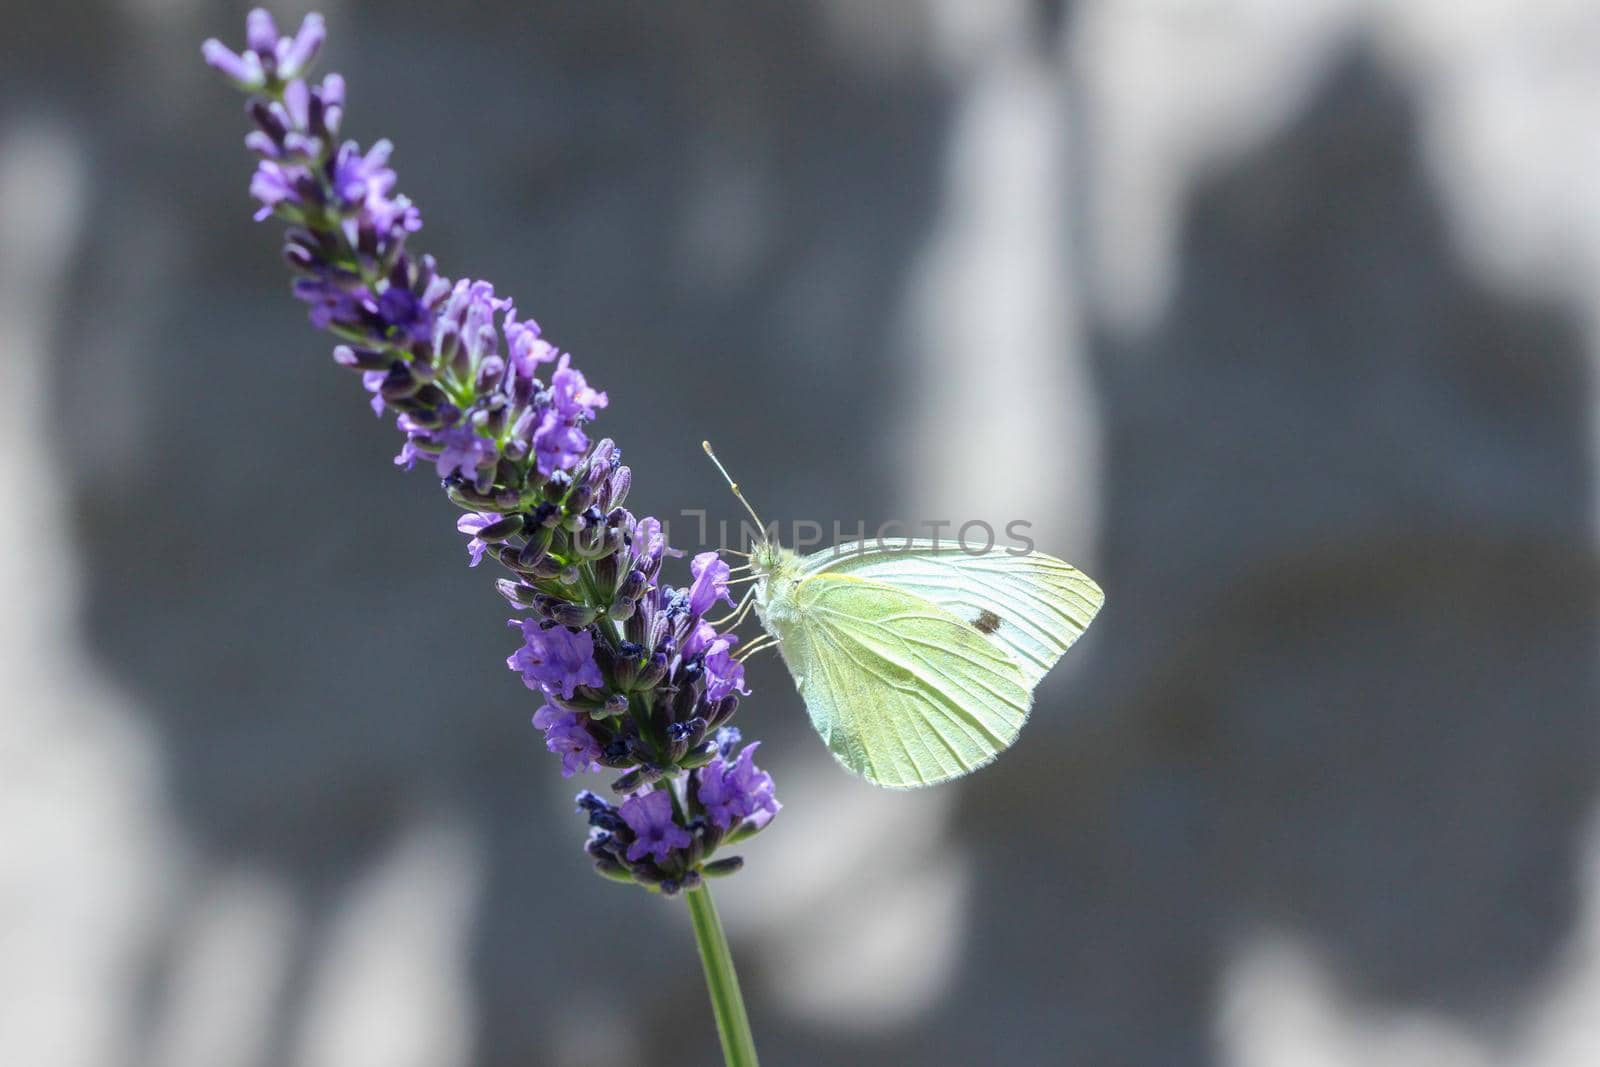 Cabbage white butterfly on a lavender flower by reinerc